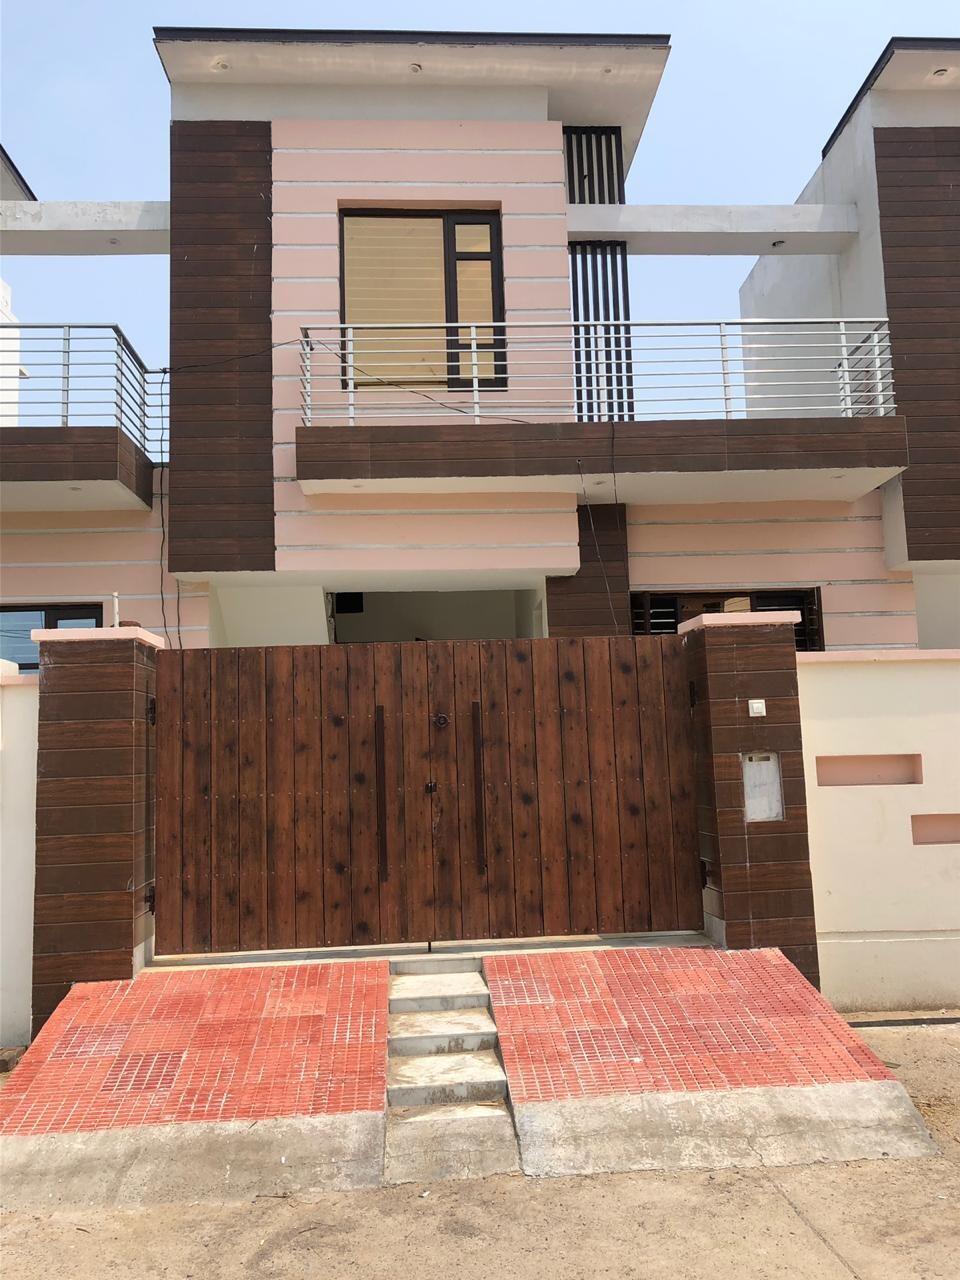 2 BHK House / Villa for sale in Ambala Cantt - 170 Sq. Ft.